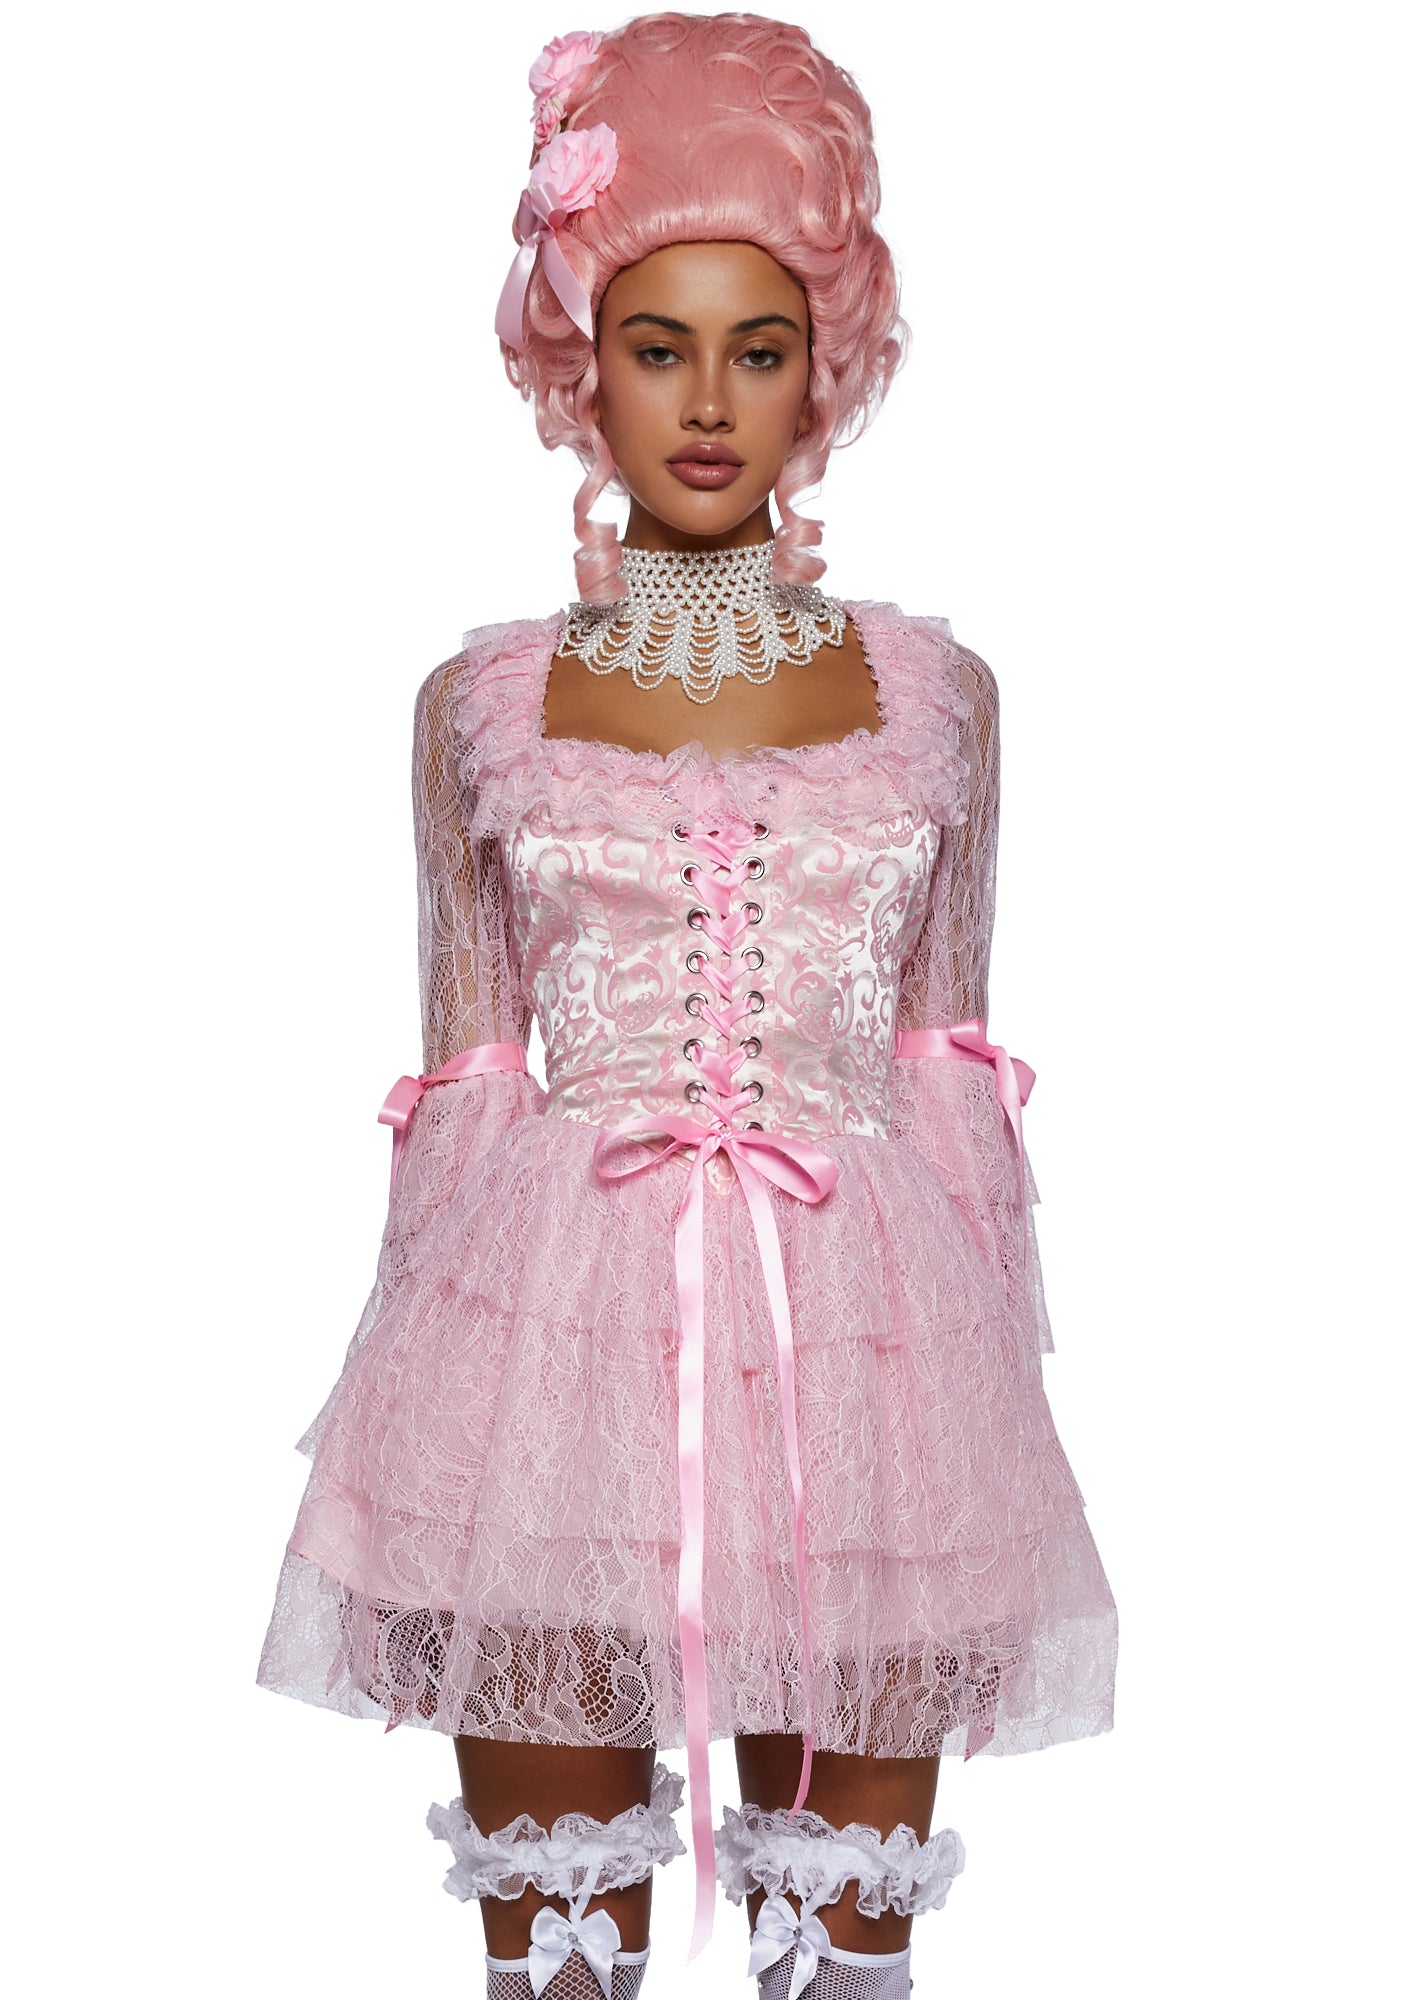 Marie Antoinette | French Queen Costume - Pink